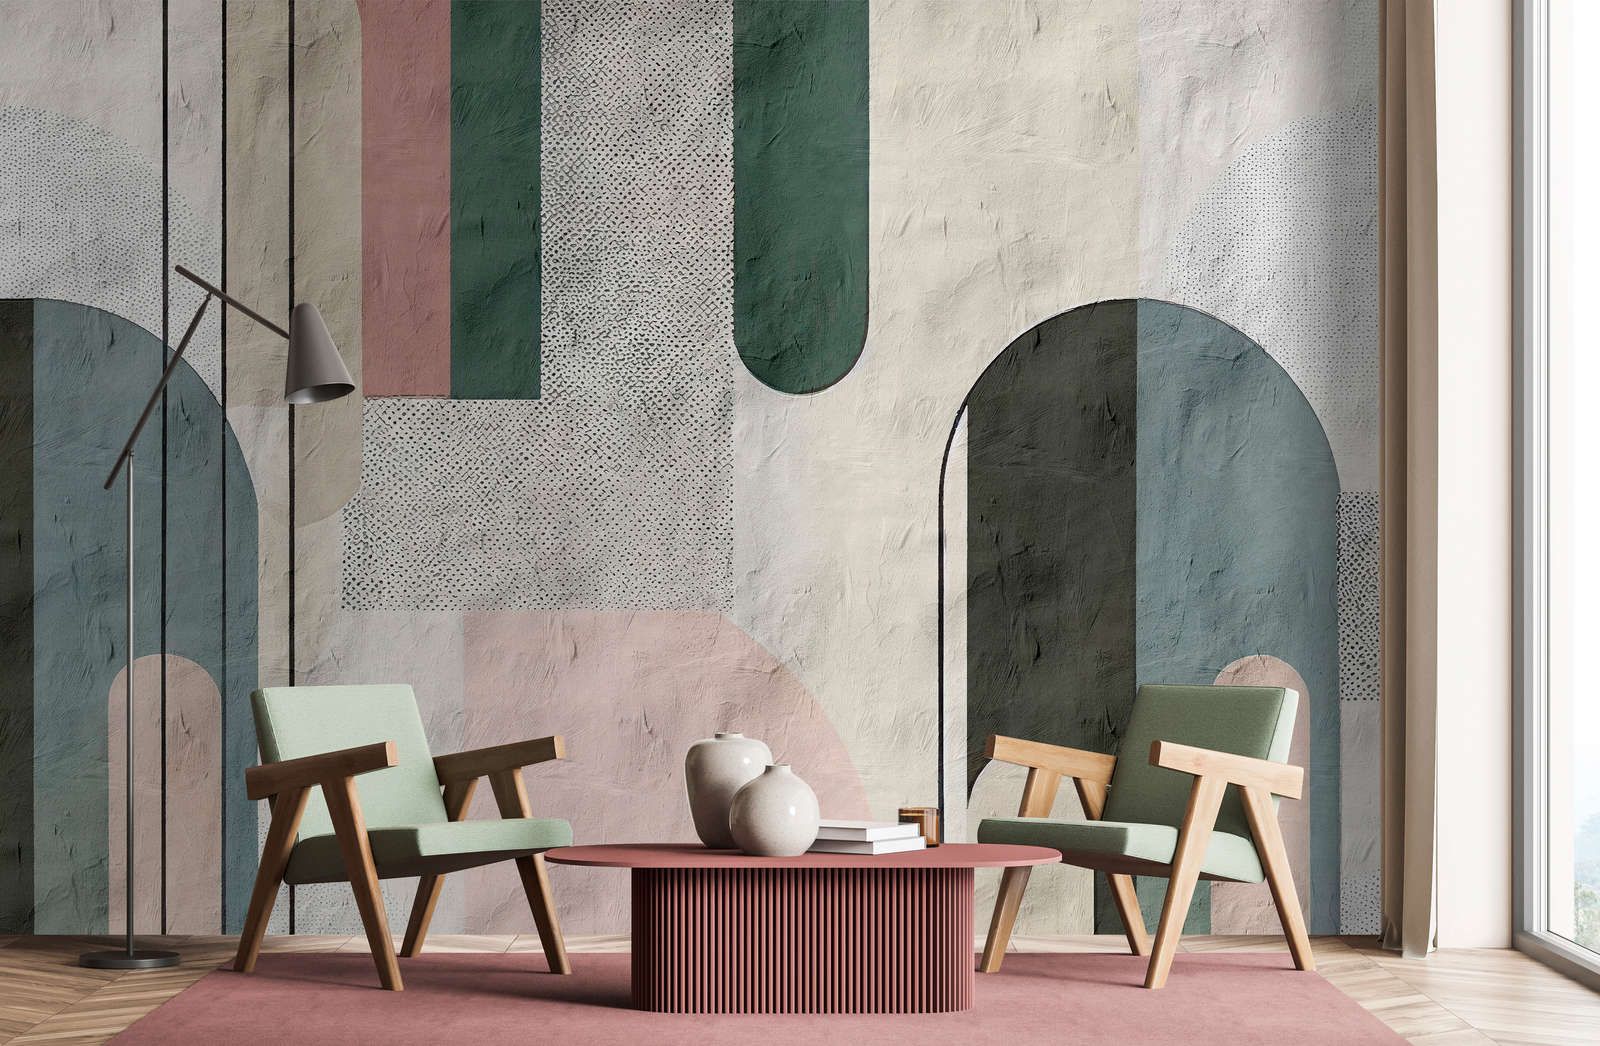             Photo wallpaper »bogeta« - Graphic pattern with round arches - Used style with clay plaster texture | Smooth, slightly shiny premium non-woven fabric
        